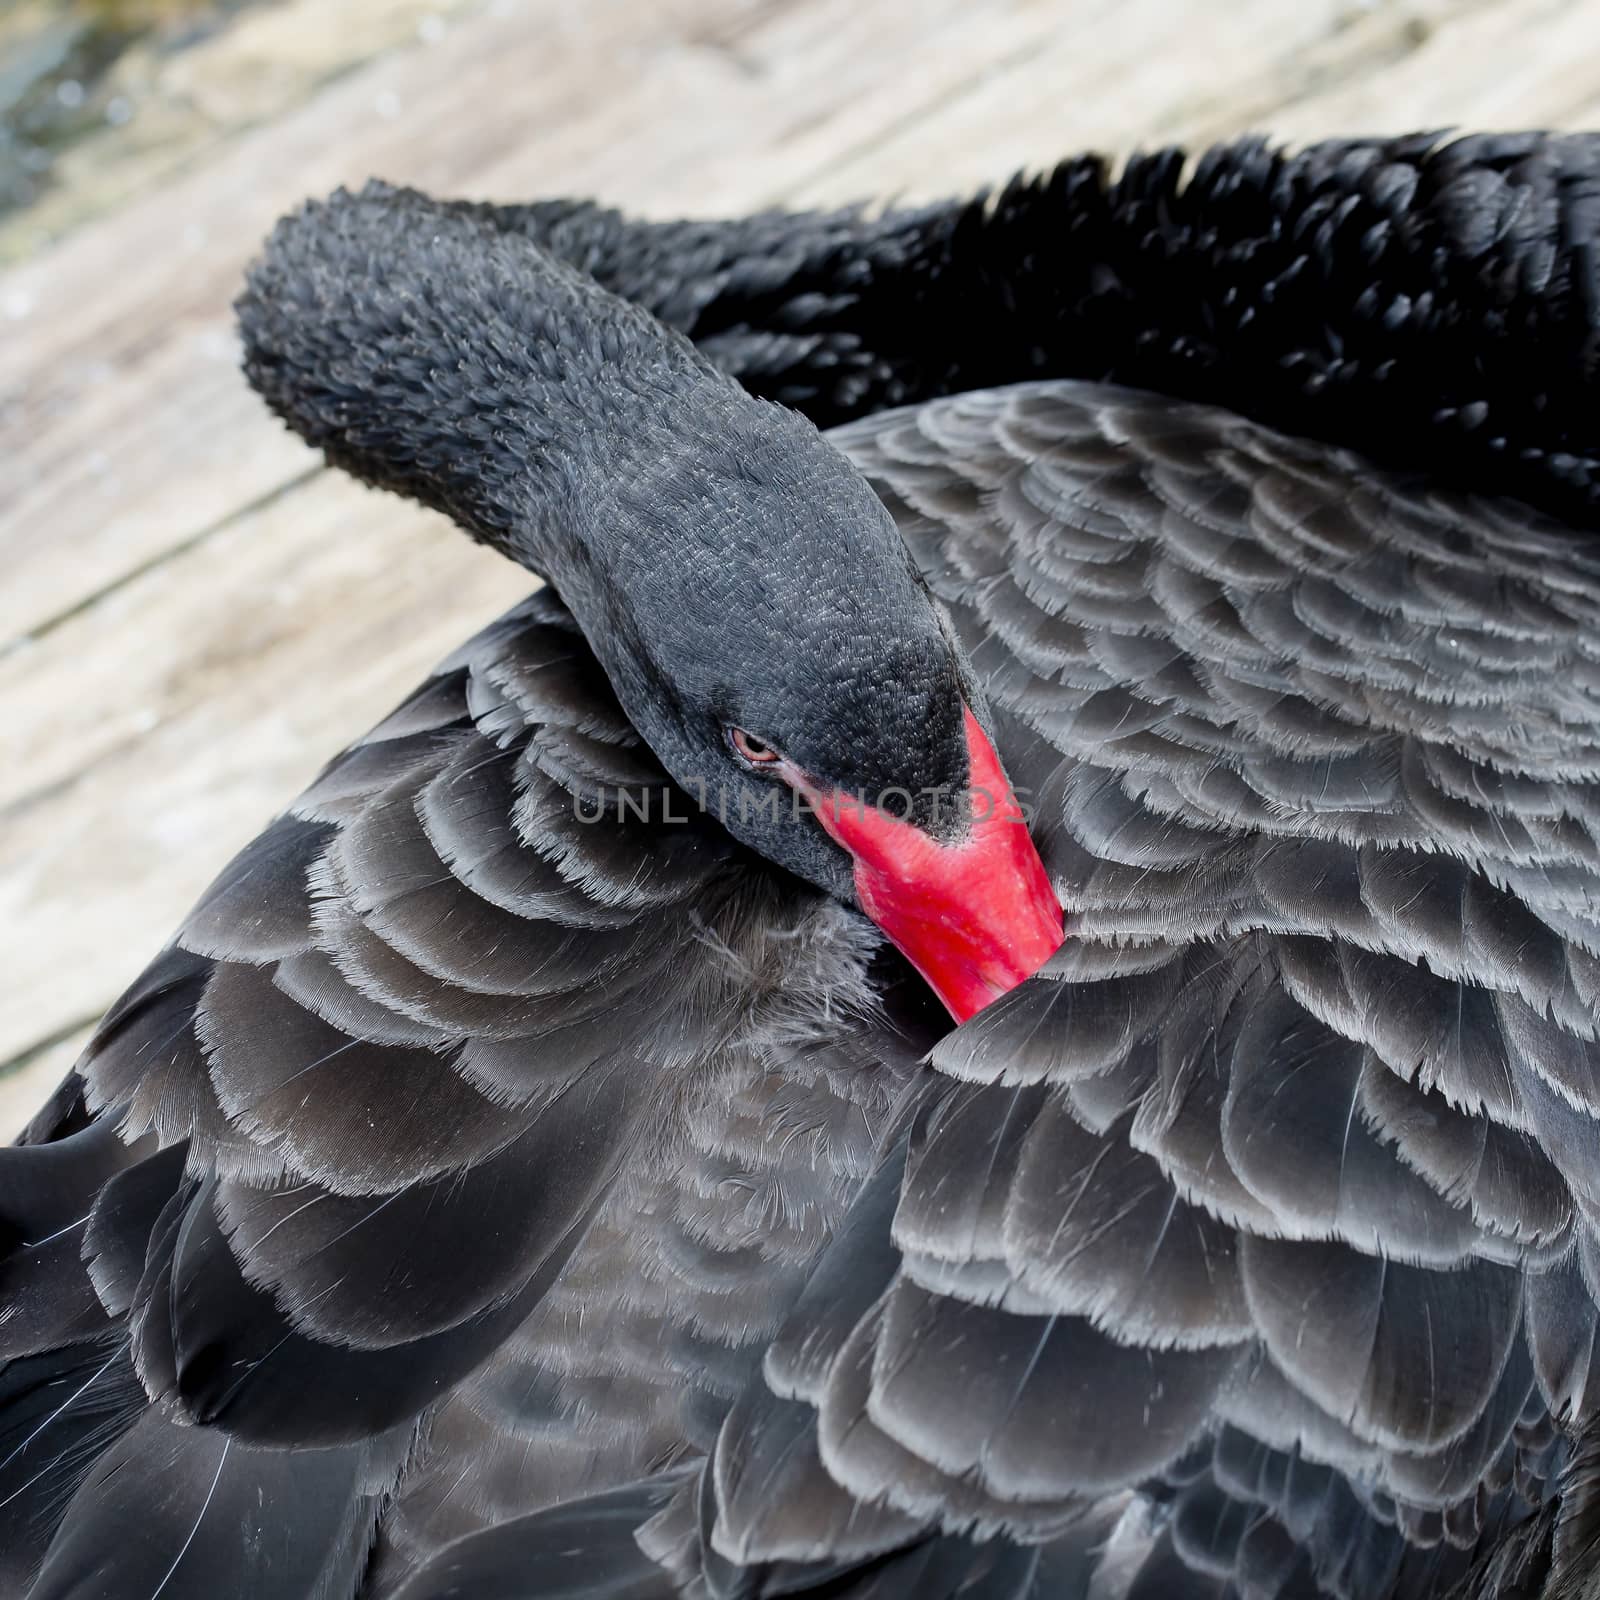 Close up Portrait of a black swan with red beak